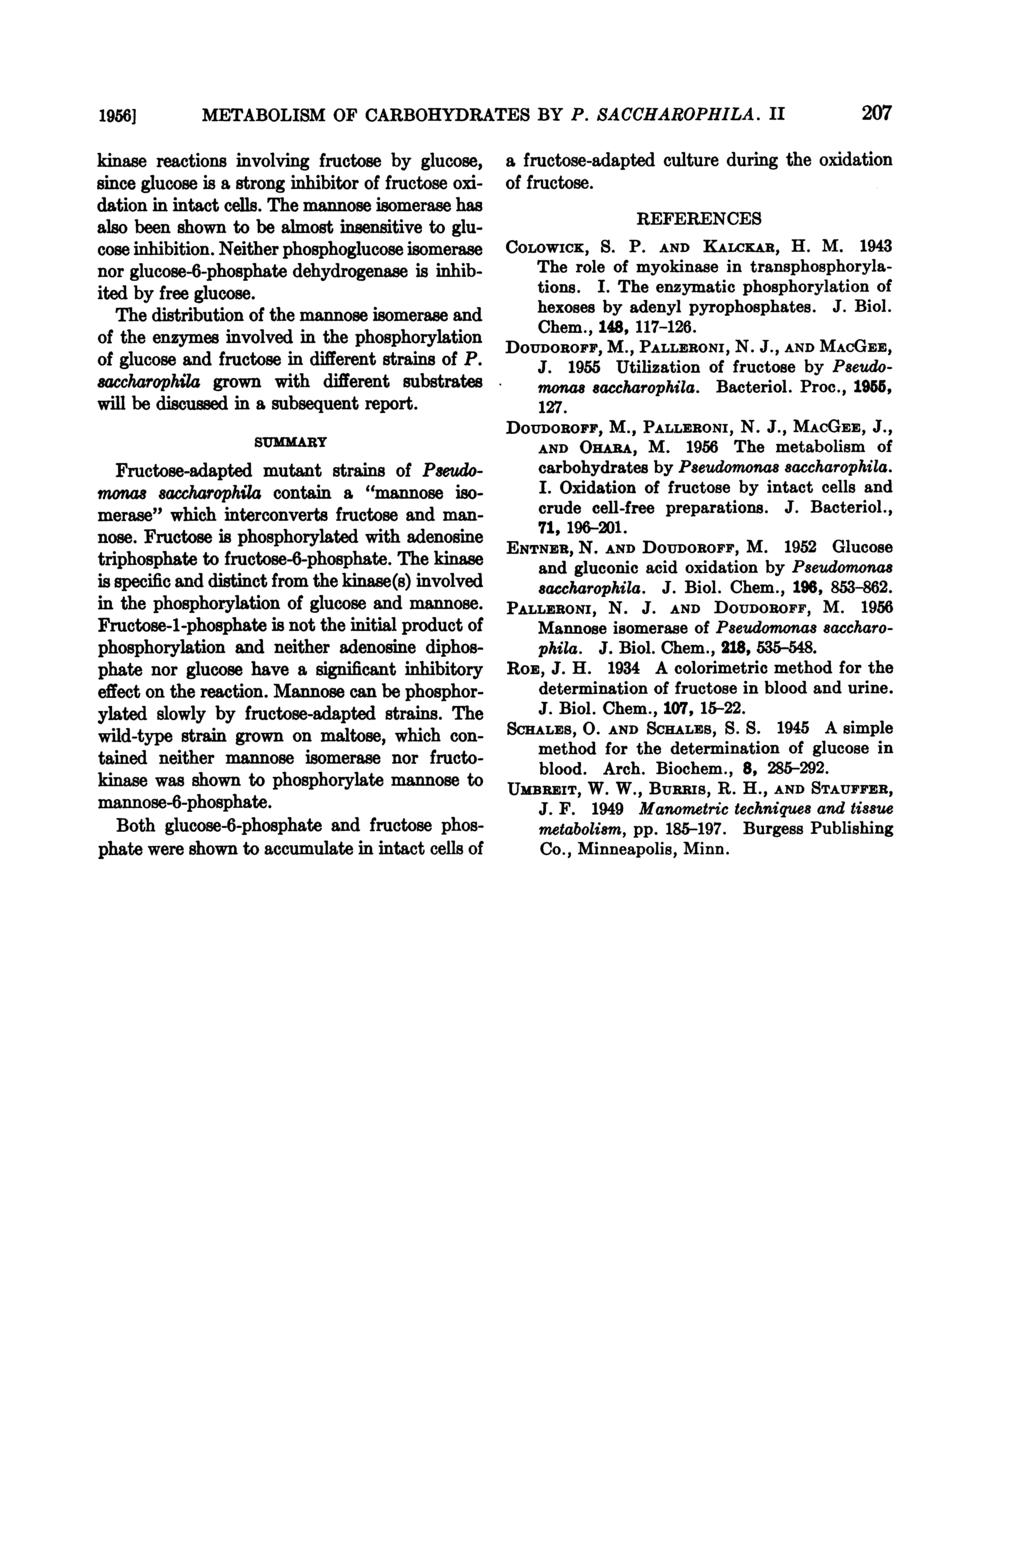 1956] METABOLISM OF CARBOHYDRATES BY P. SACCHAROPHILA. II kinase reactions involving fructose by glucose, since glucose is a strong inhibitor of fructose oxidation in intact cells.